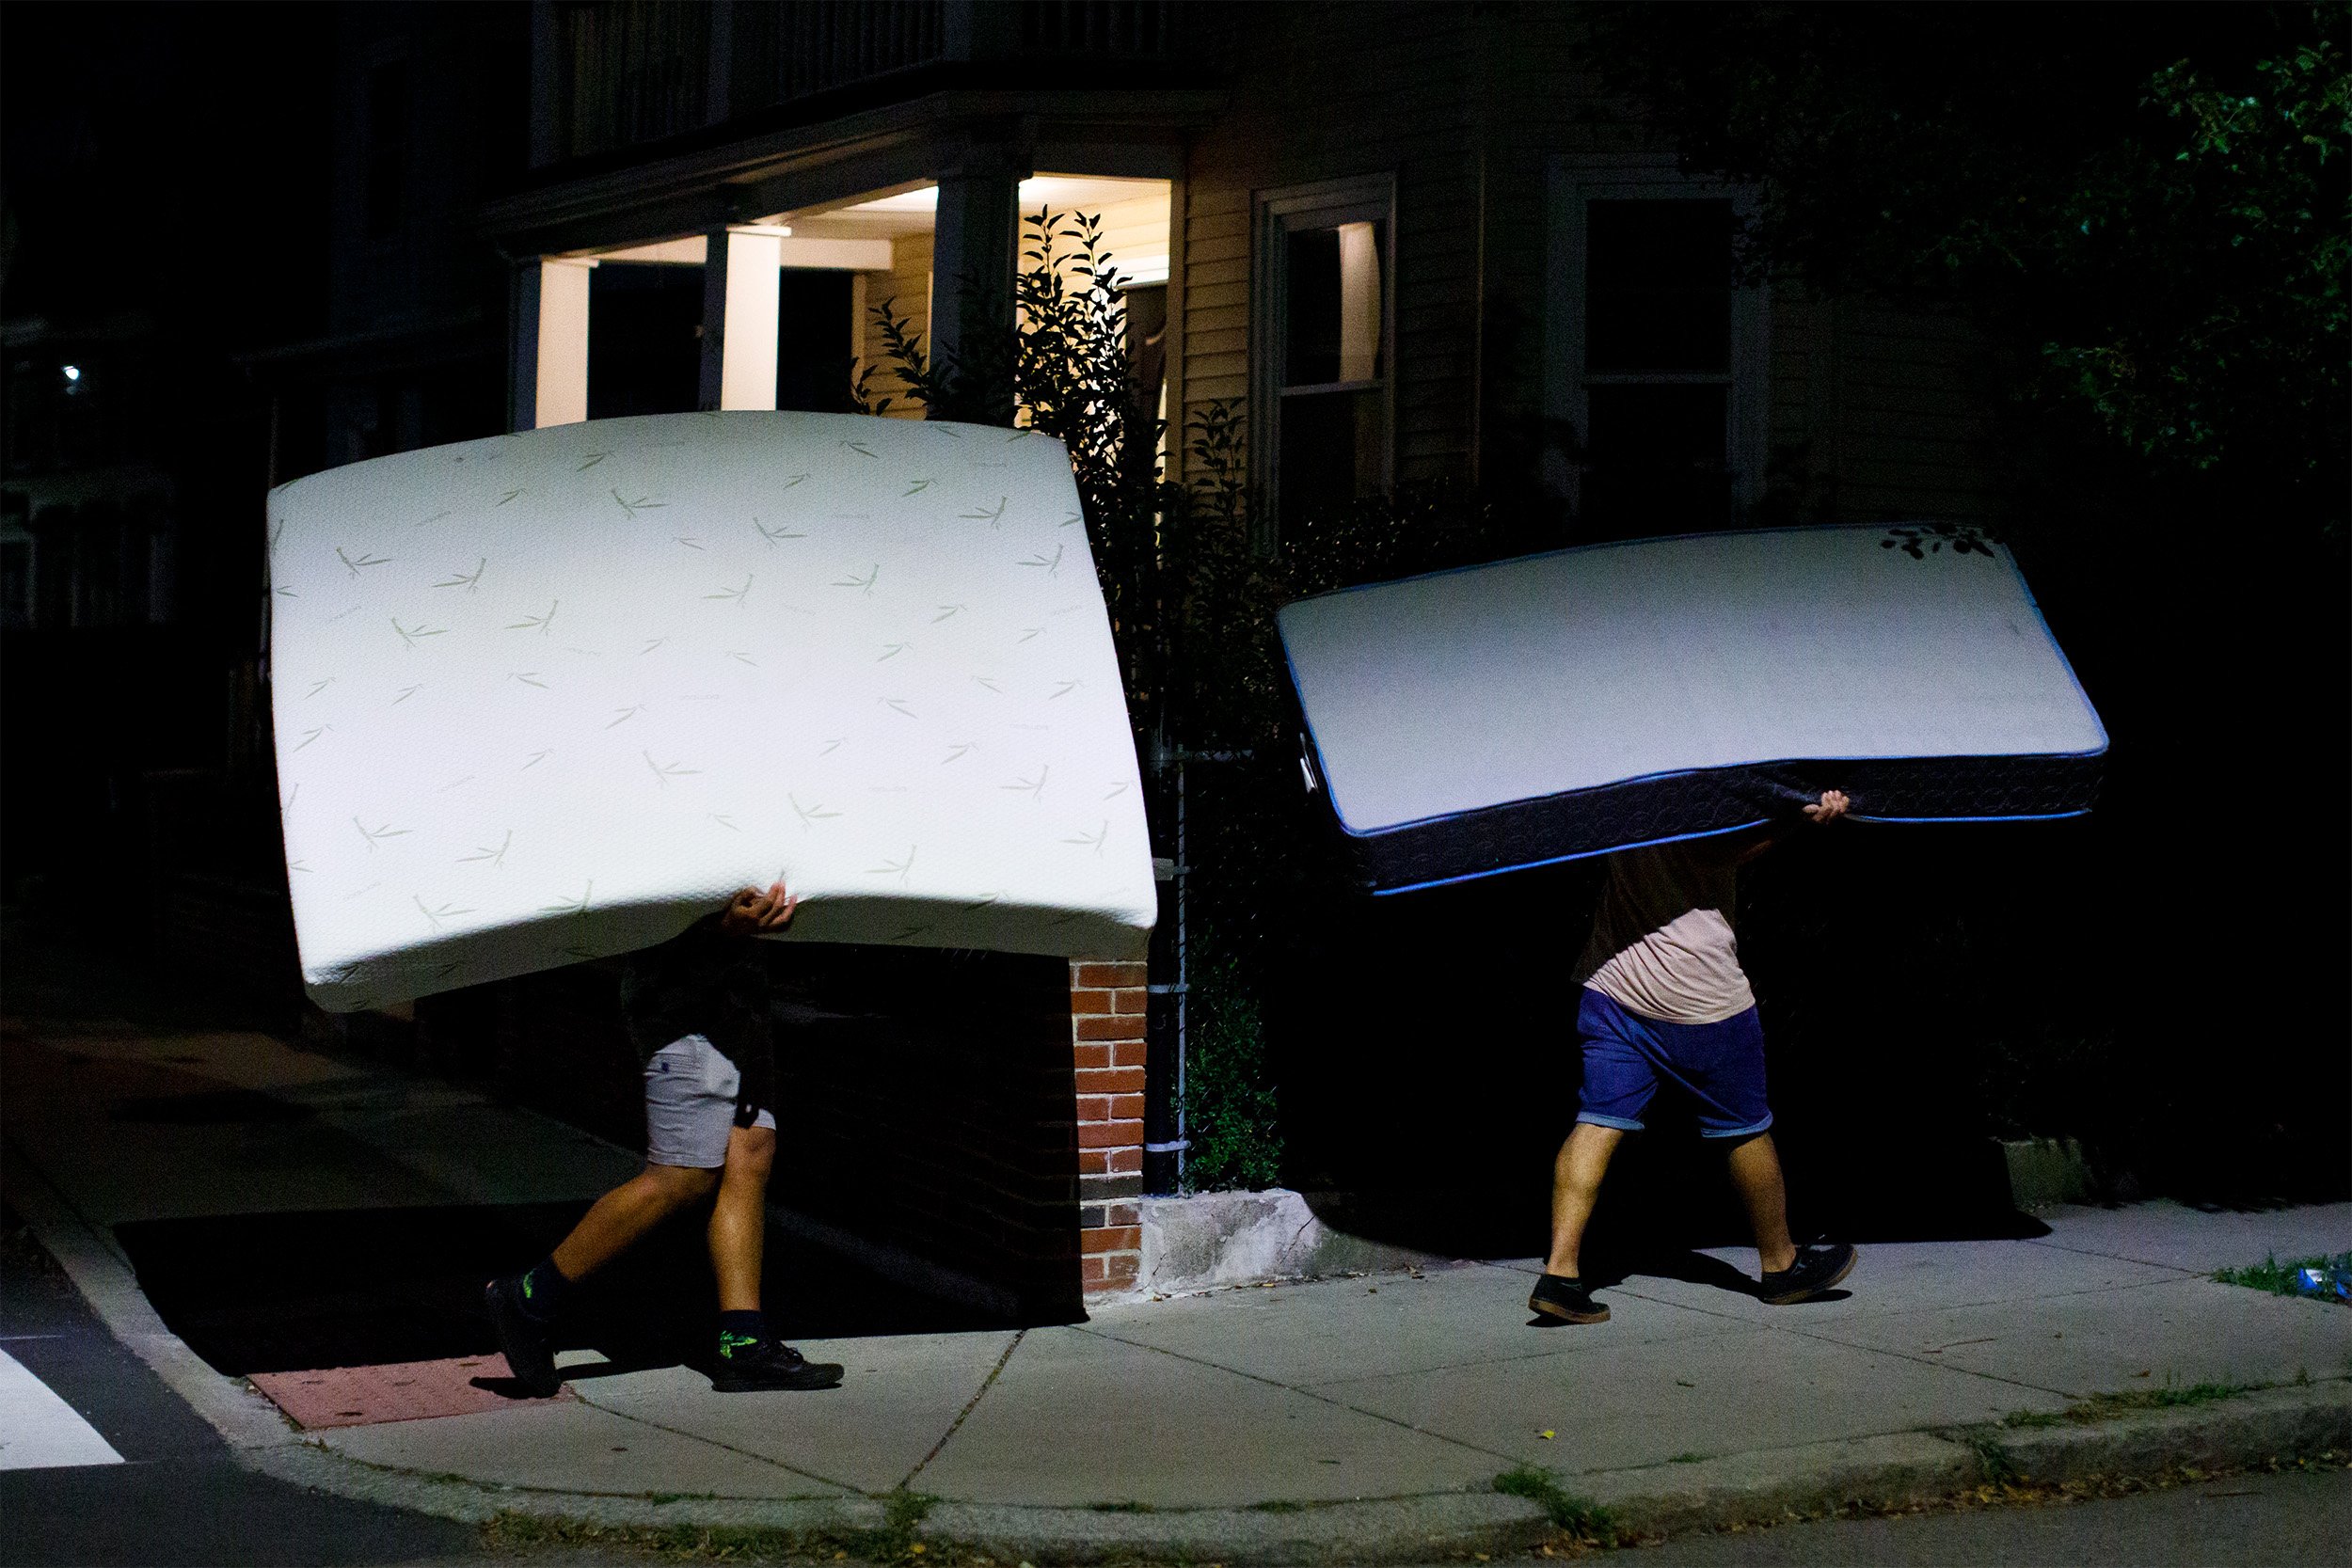  Manuel’s son Melquencedec Anthony (right) and family friend Hector Henriquez (left)  carry a mattresses though the streets of Somerville, Mass. to the new residence early in the morning of Sept. 2, 2022.  